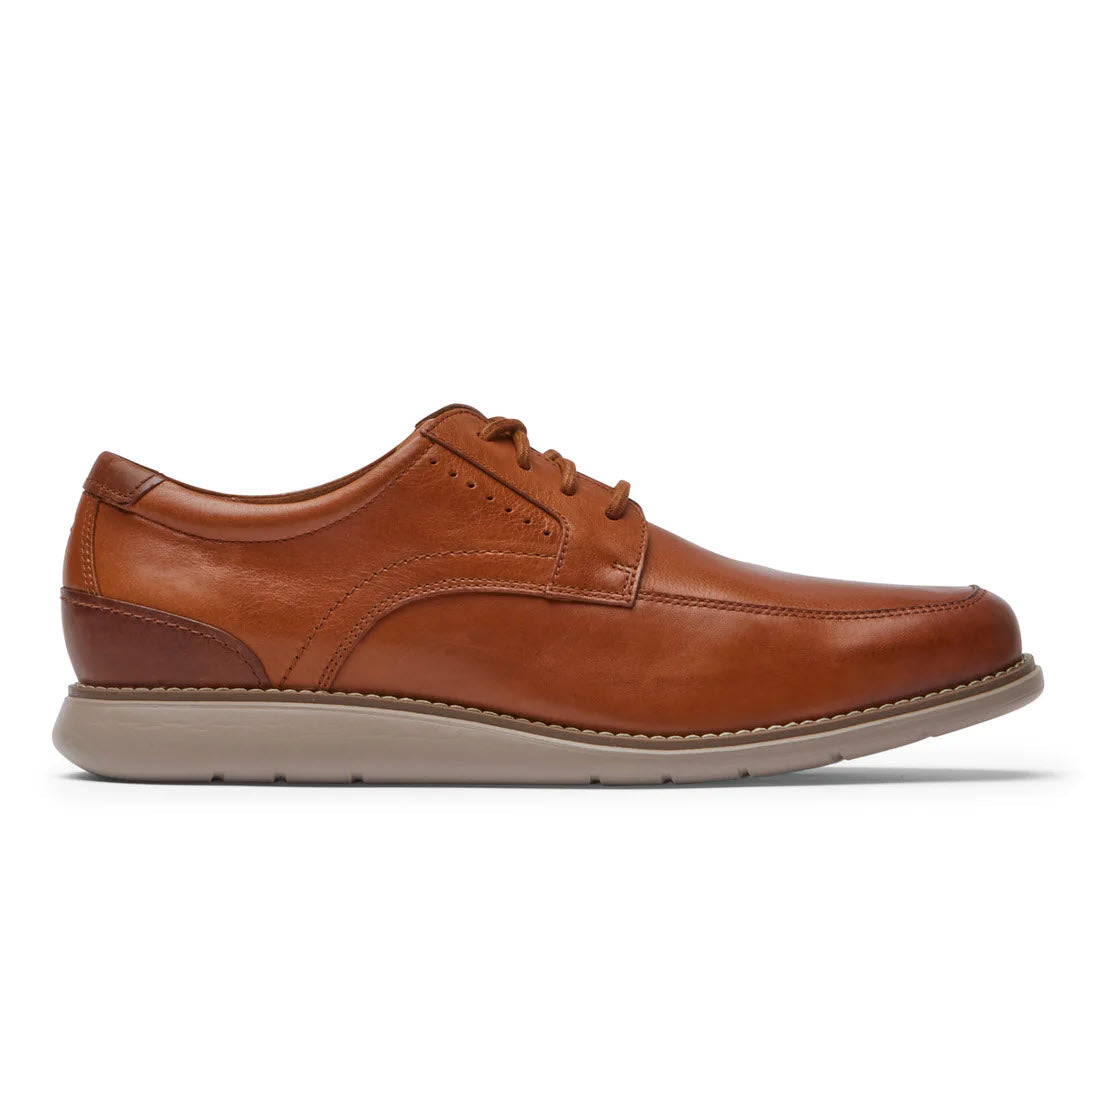 A single brown leather Rockport Total Motion Craft men&#39;s dress shoe with laces on a white background.